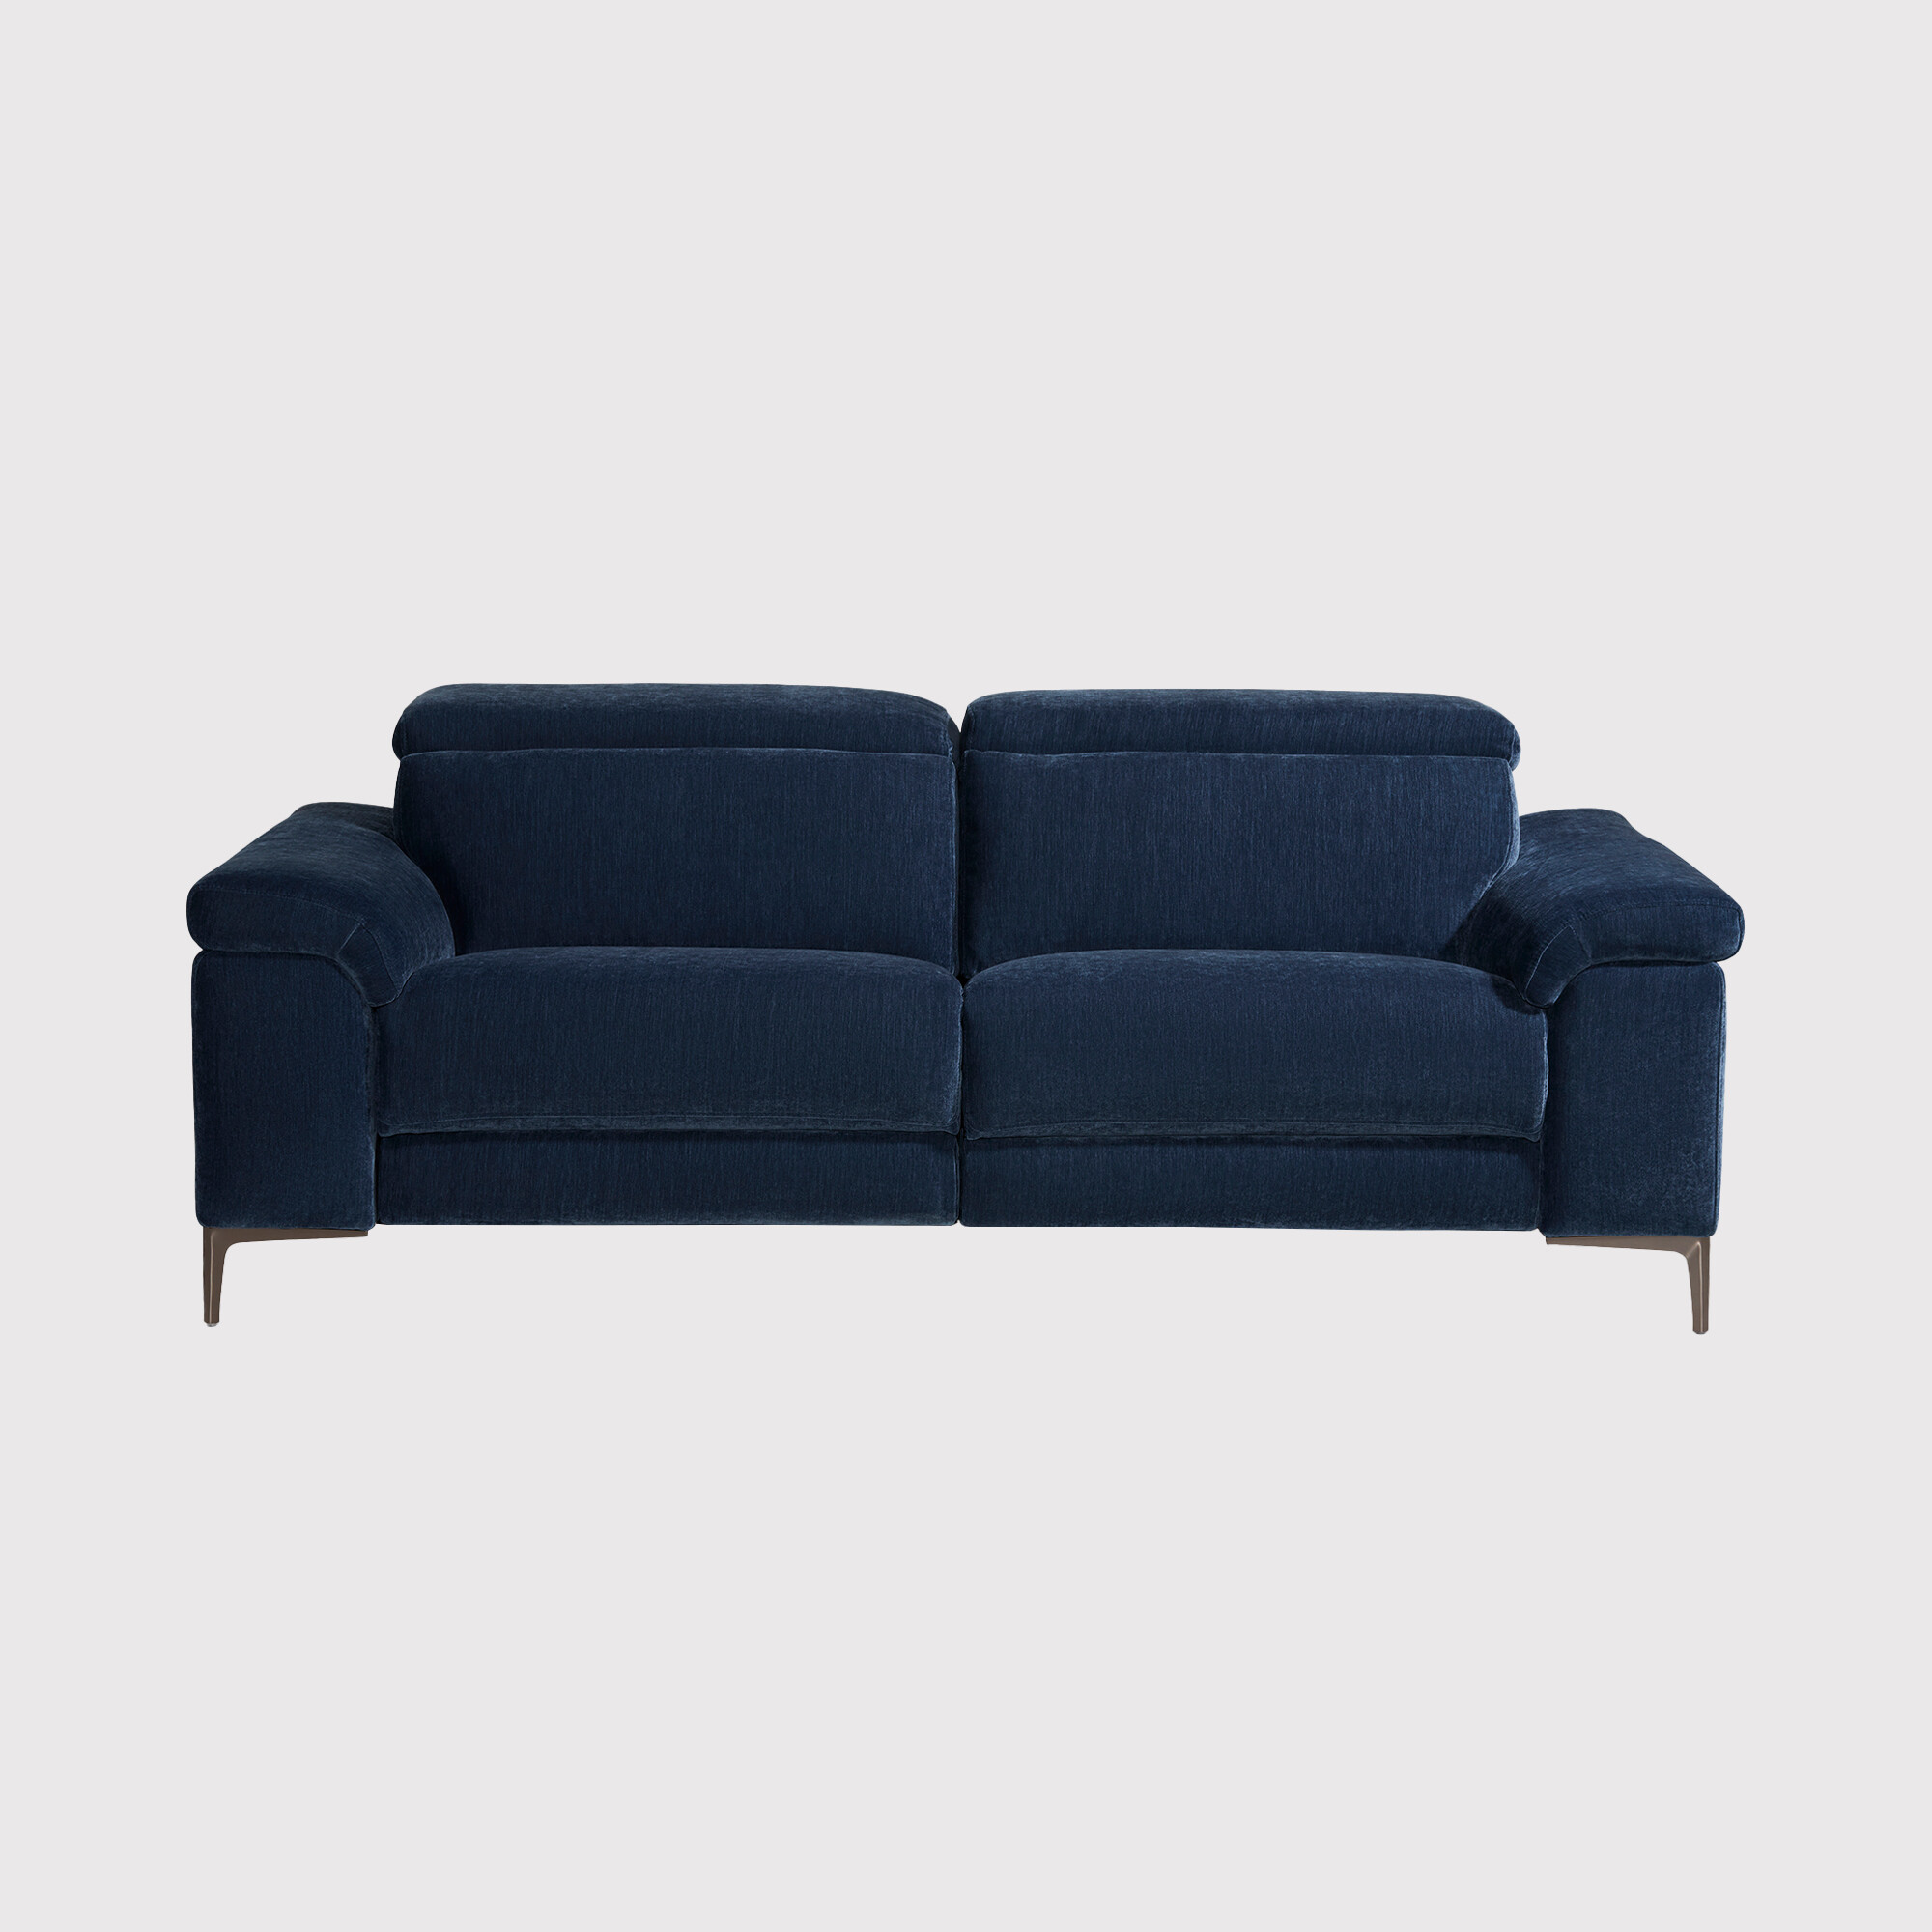 Paolo 3 Seater Recliner Sofa, Blue Fabric | Barker & Stonehouse